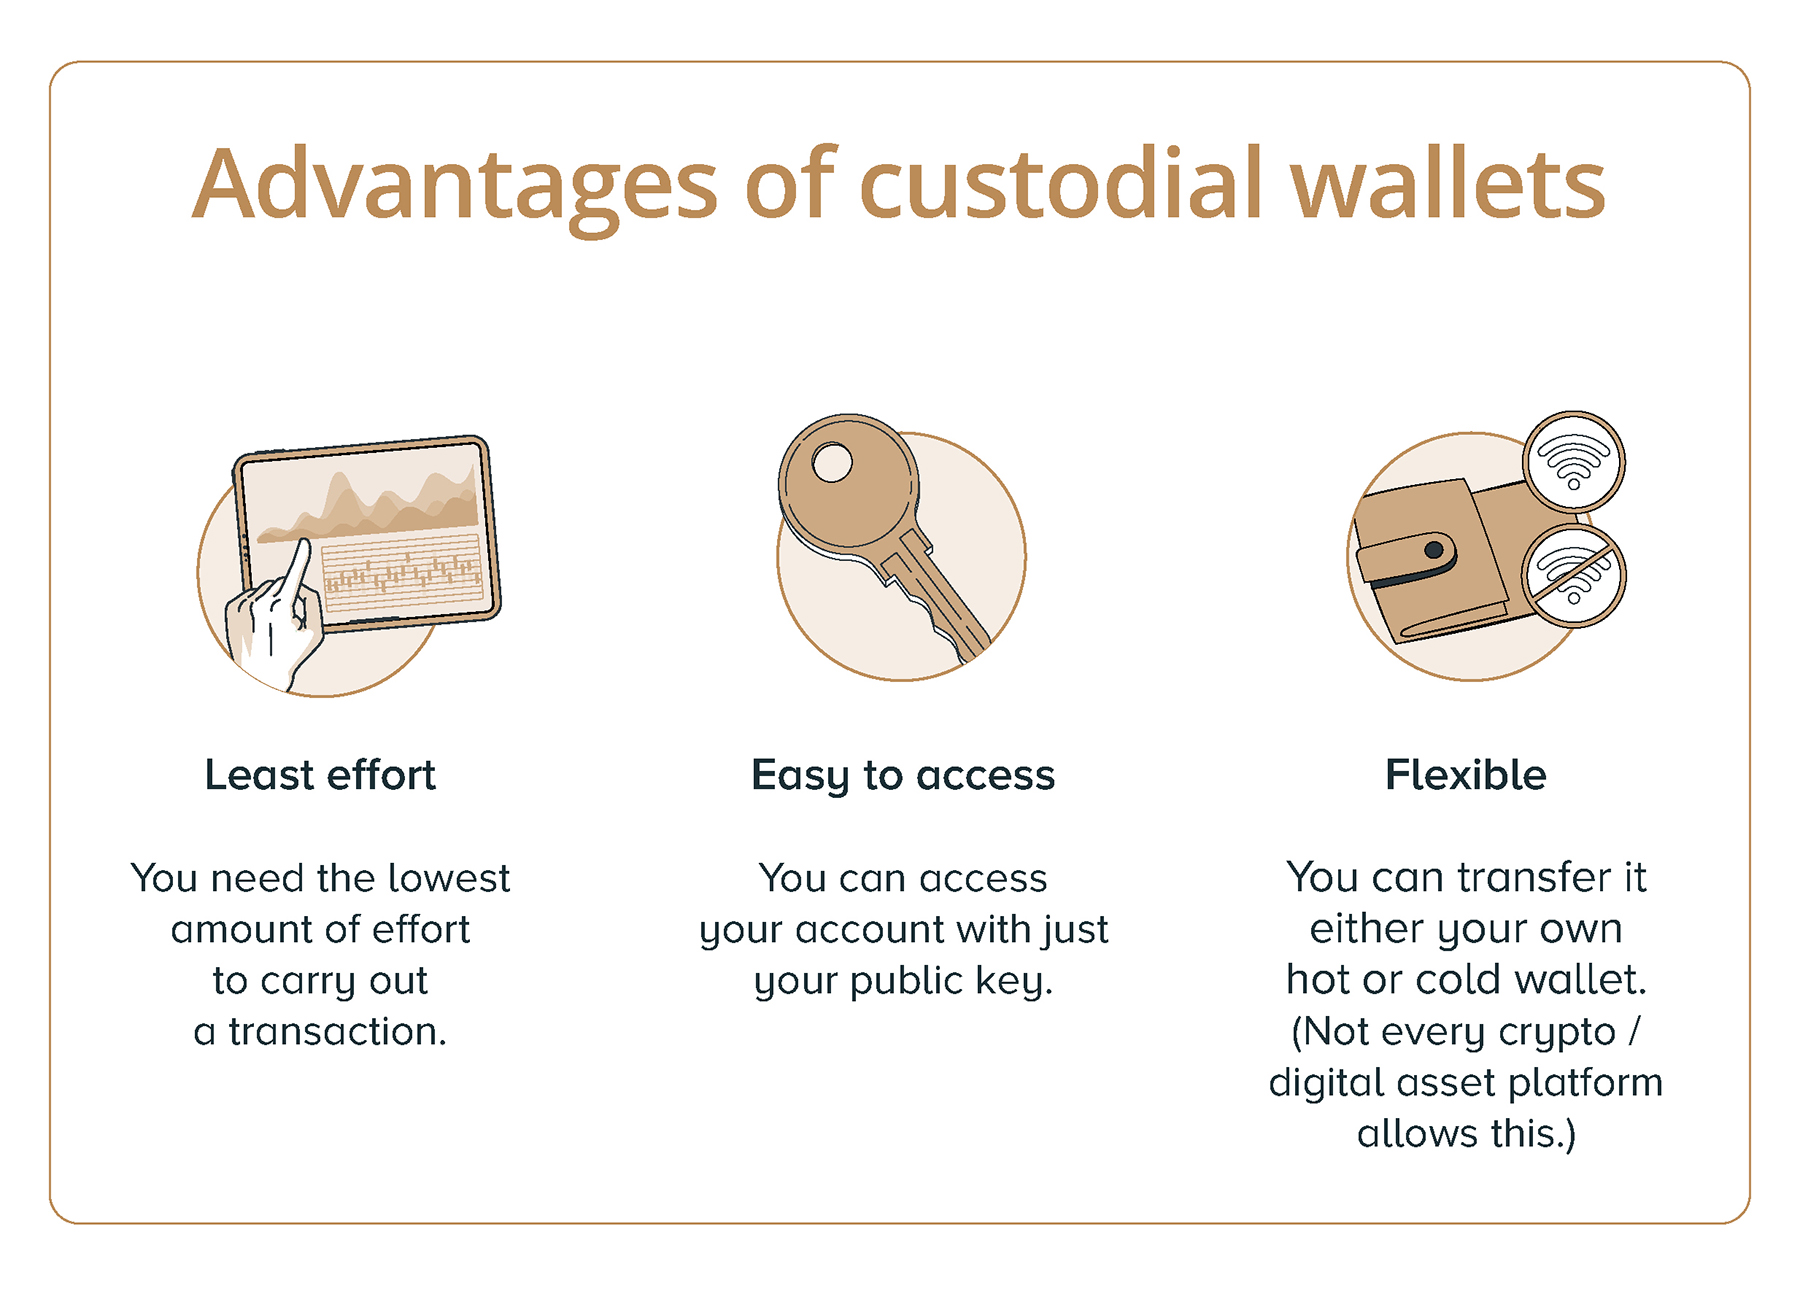 Advantages of custodial wallets for cryptocurrency include the amount of effort required, ease of access, and flexibility.